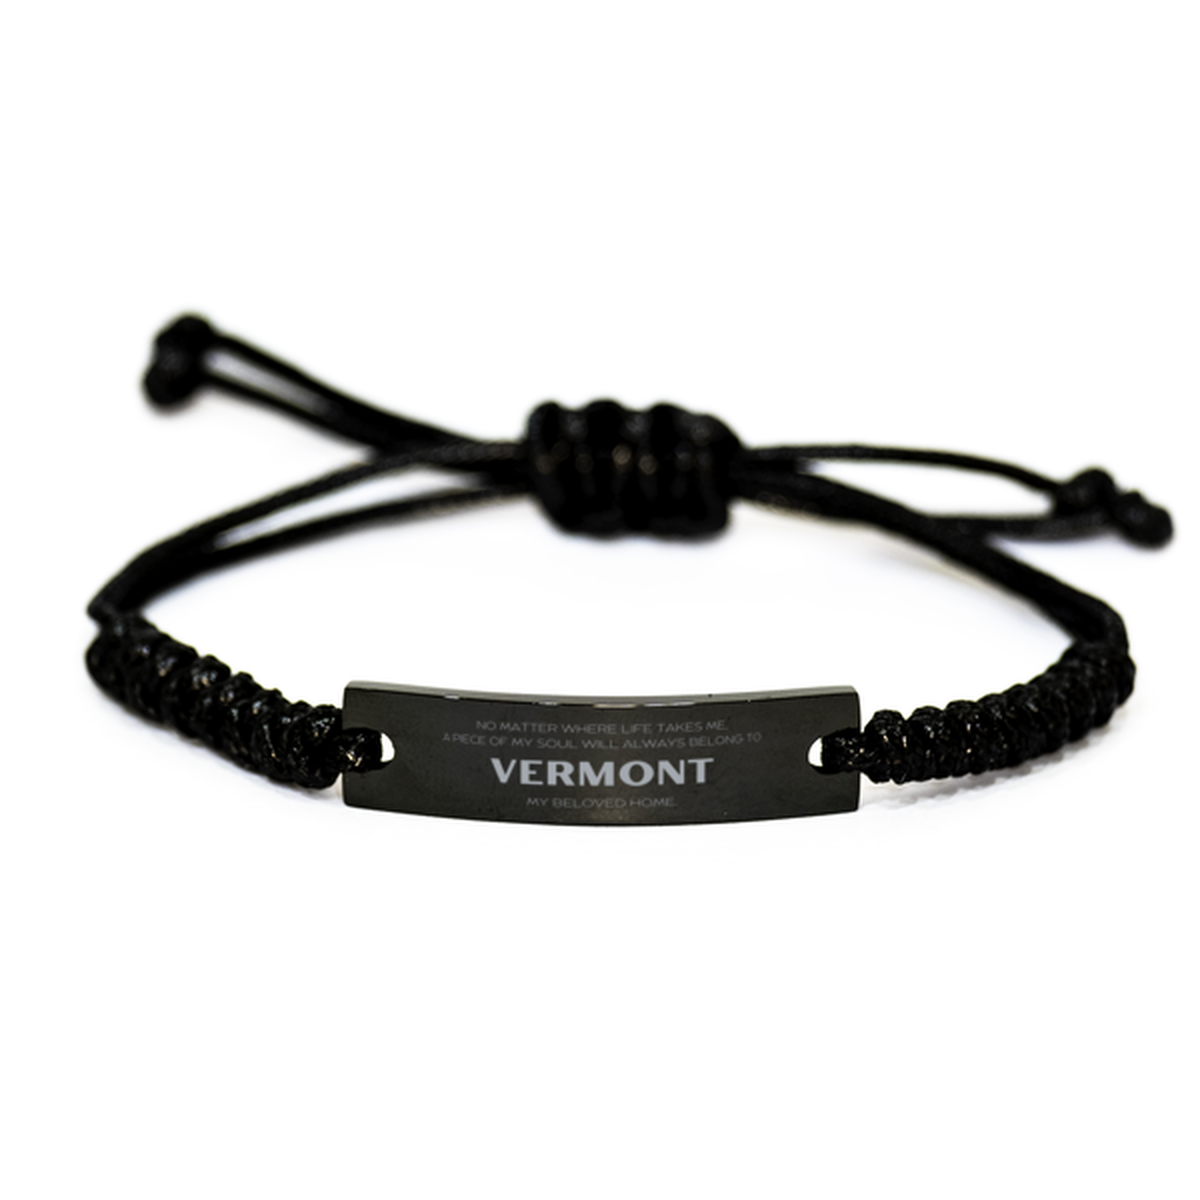 Love Vermont State Gifts, My soul will always belong to Vermont, Proud Black Rope Bracelet, Birthday Unique Gifts For Vermont Men, Women, Friends